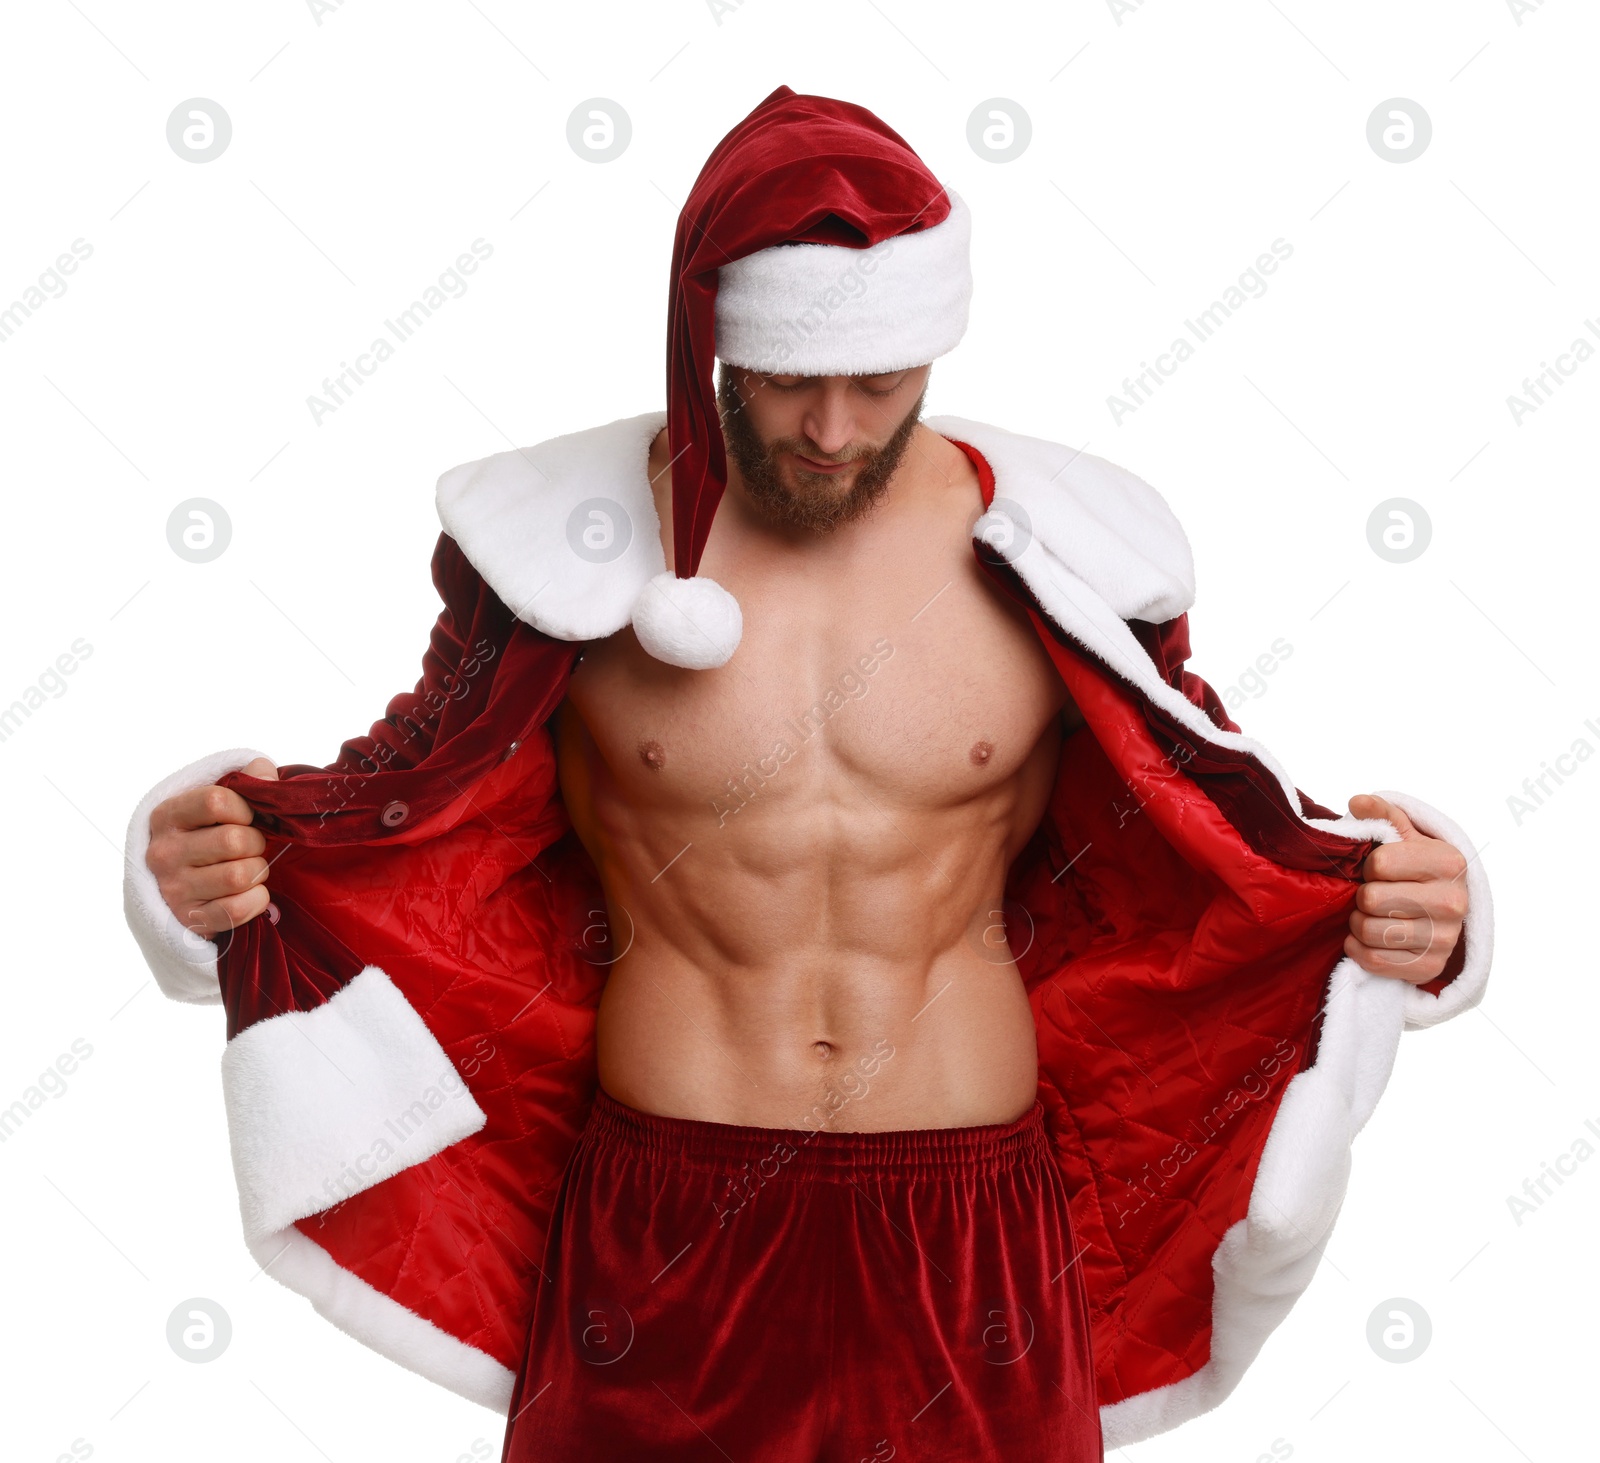 Photo of Attractive young man with muscular body in Santa costume on white background